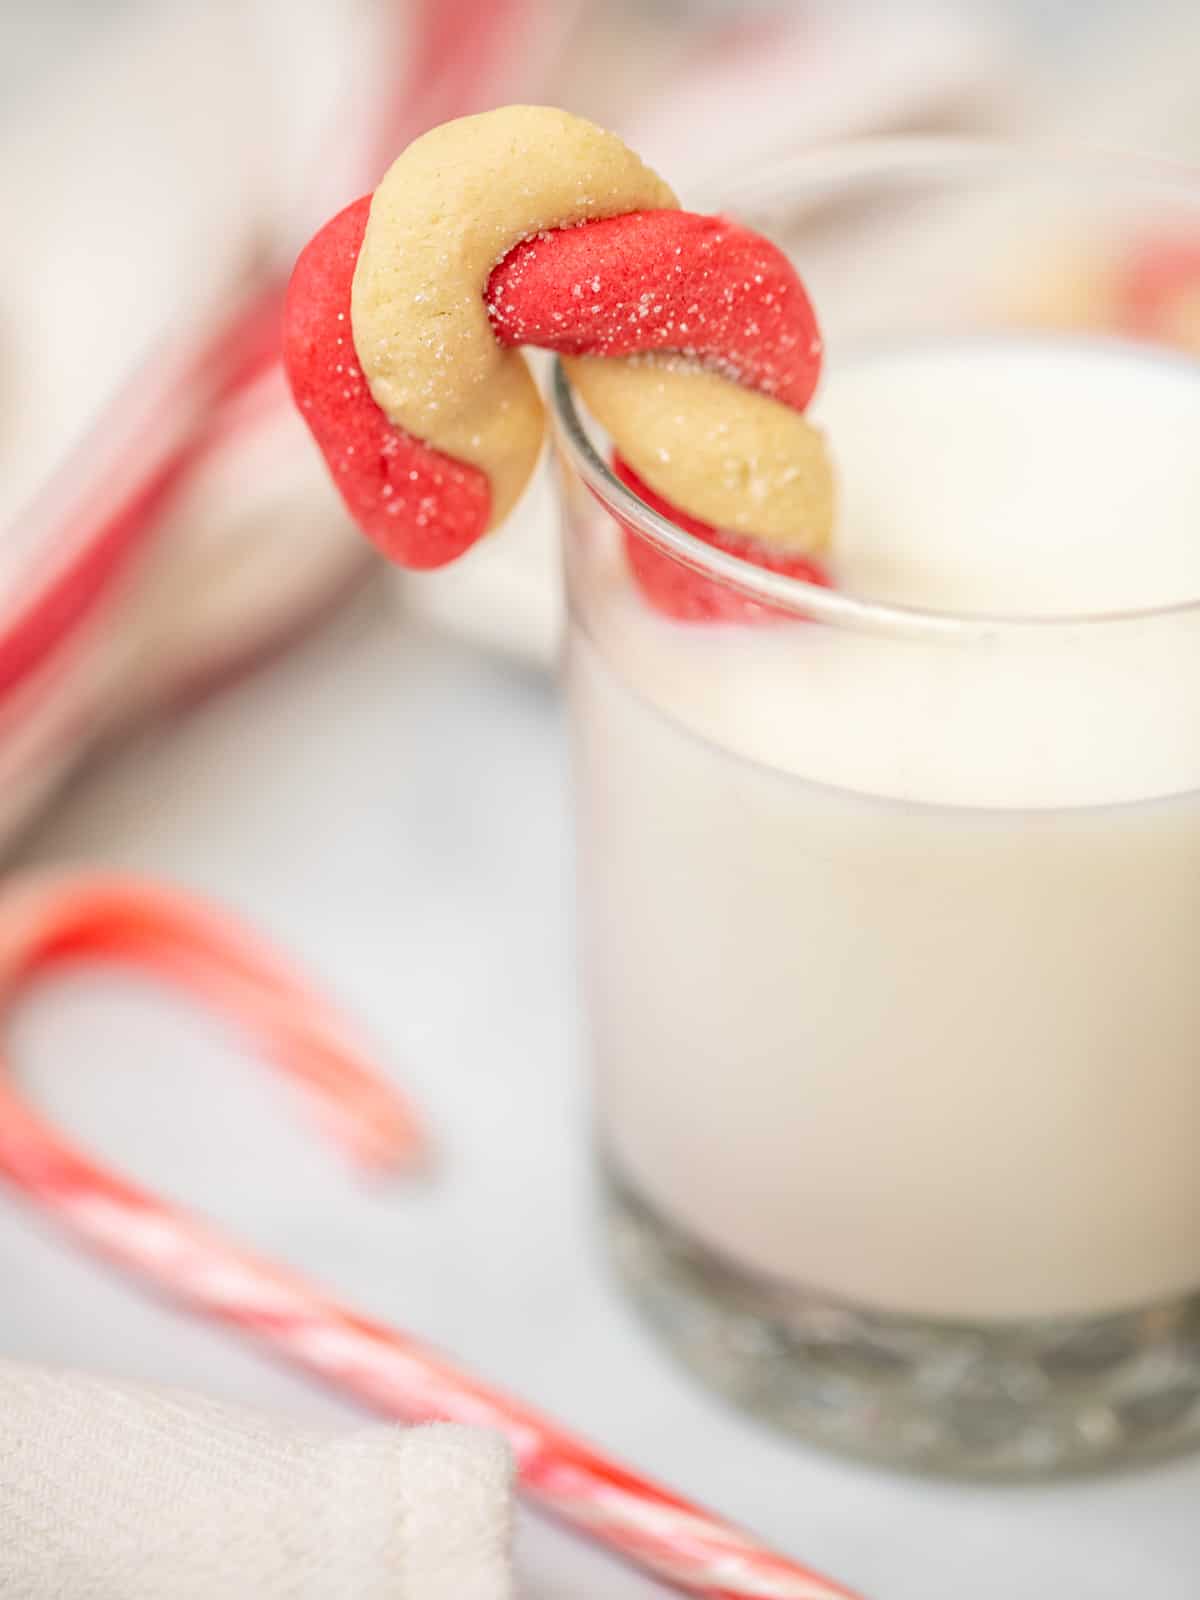 Candy Cane Cookie dipping into glass of milk.